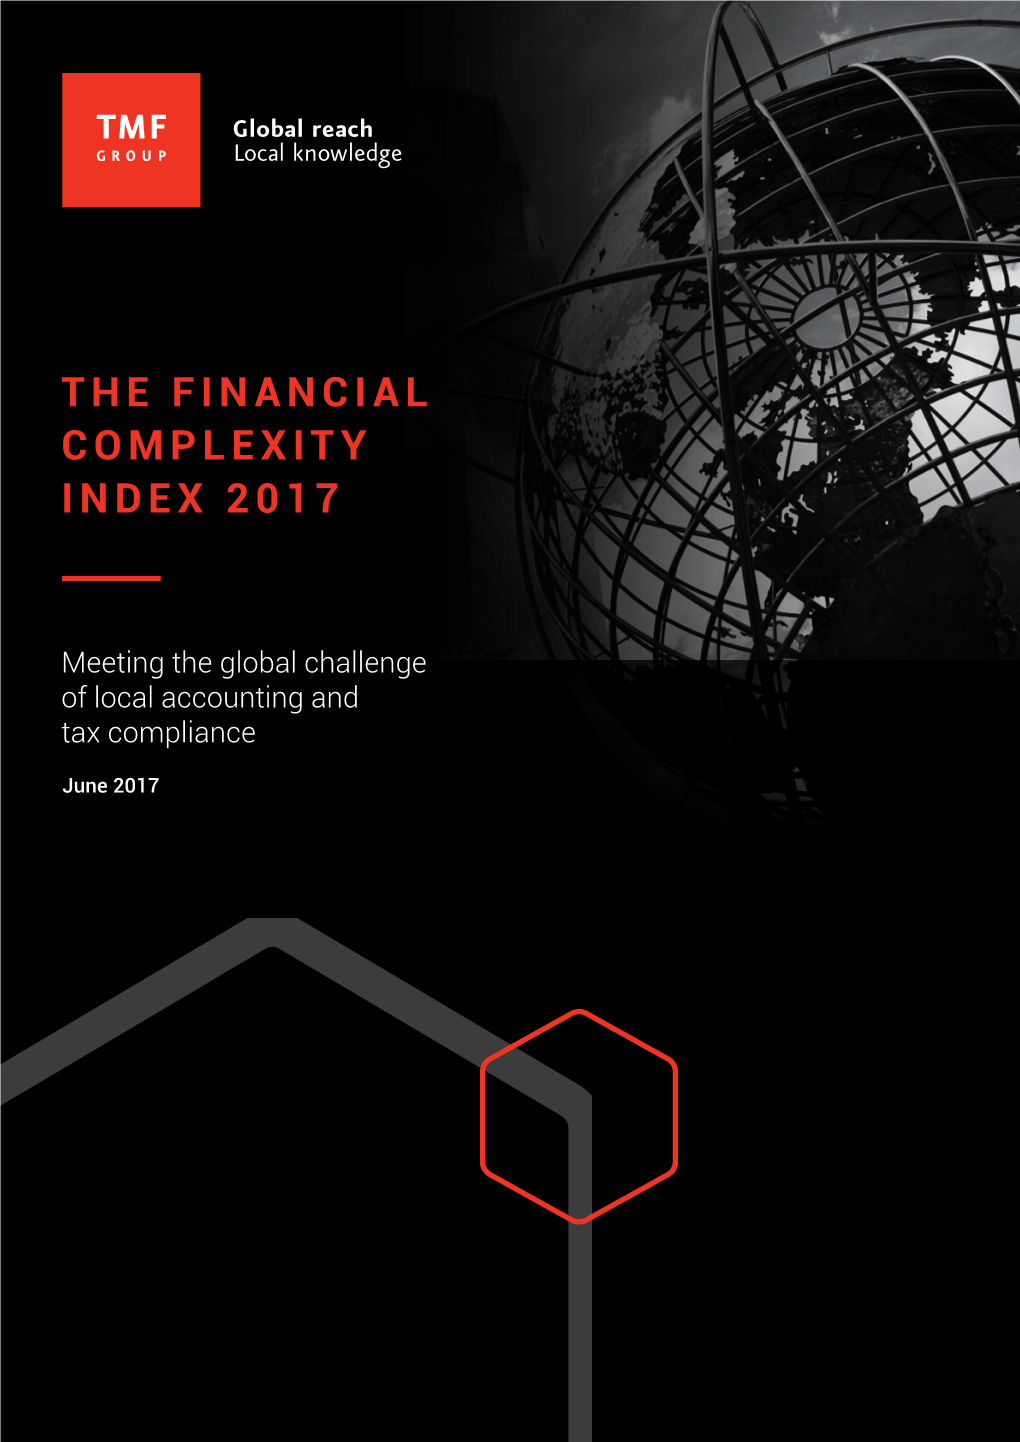 The Financial Complexity Index 2017